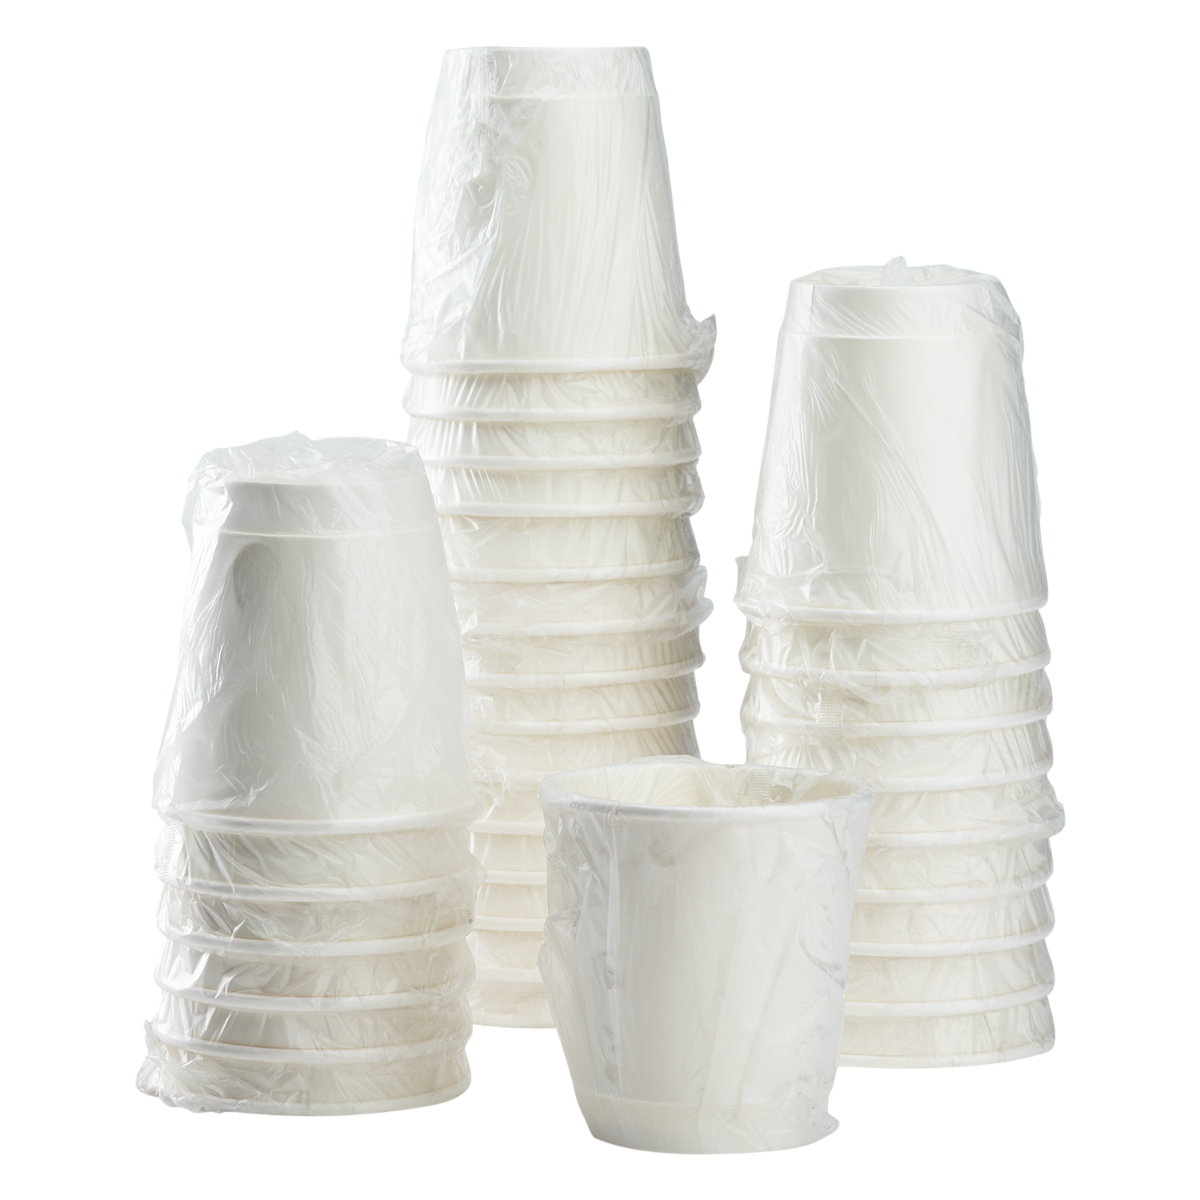 Karat 10oz Wrapped Insulated Paper Hot Cups - White (90mm) - 500 ct